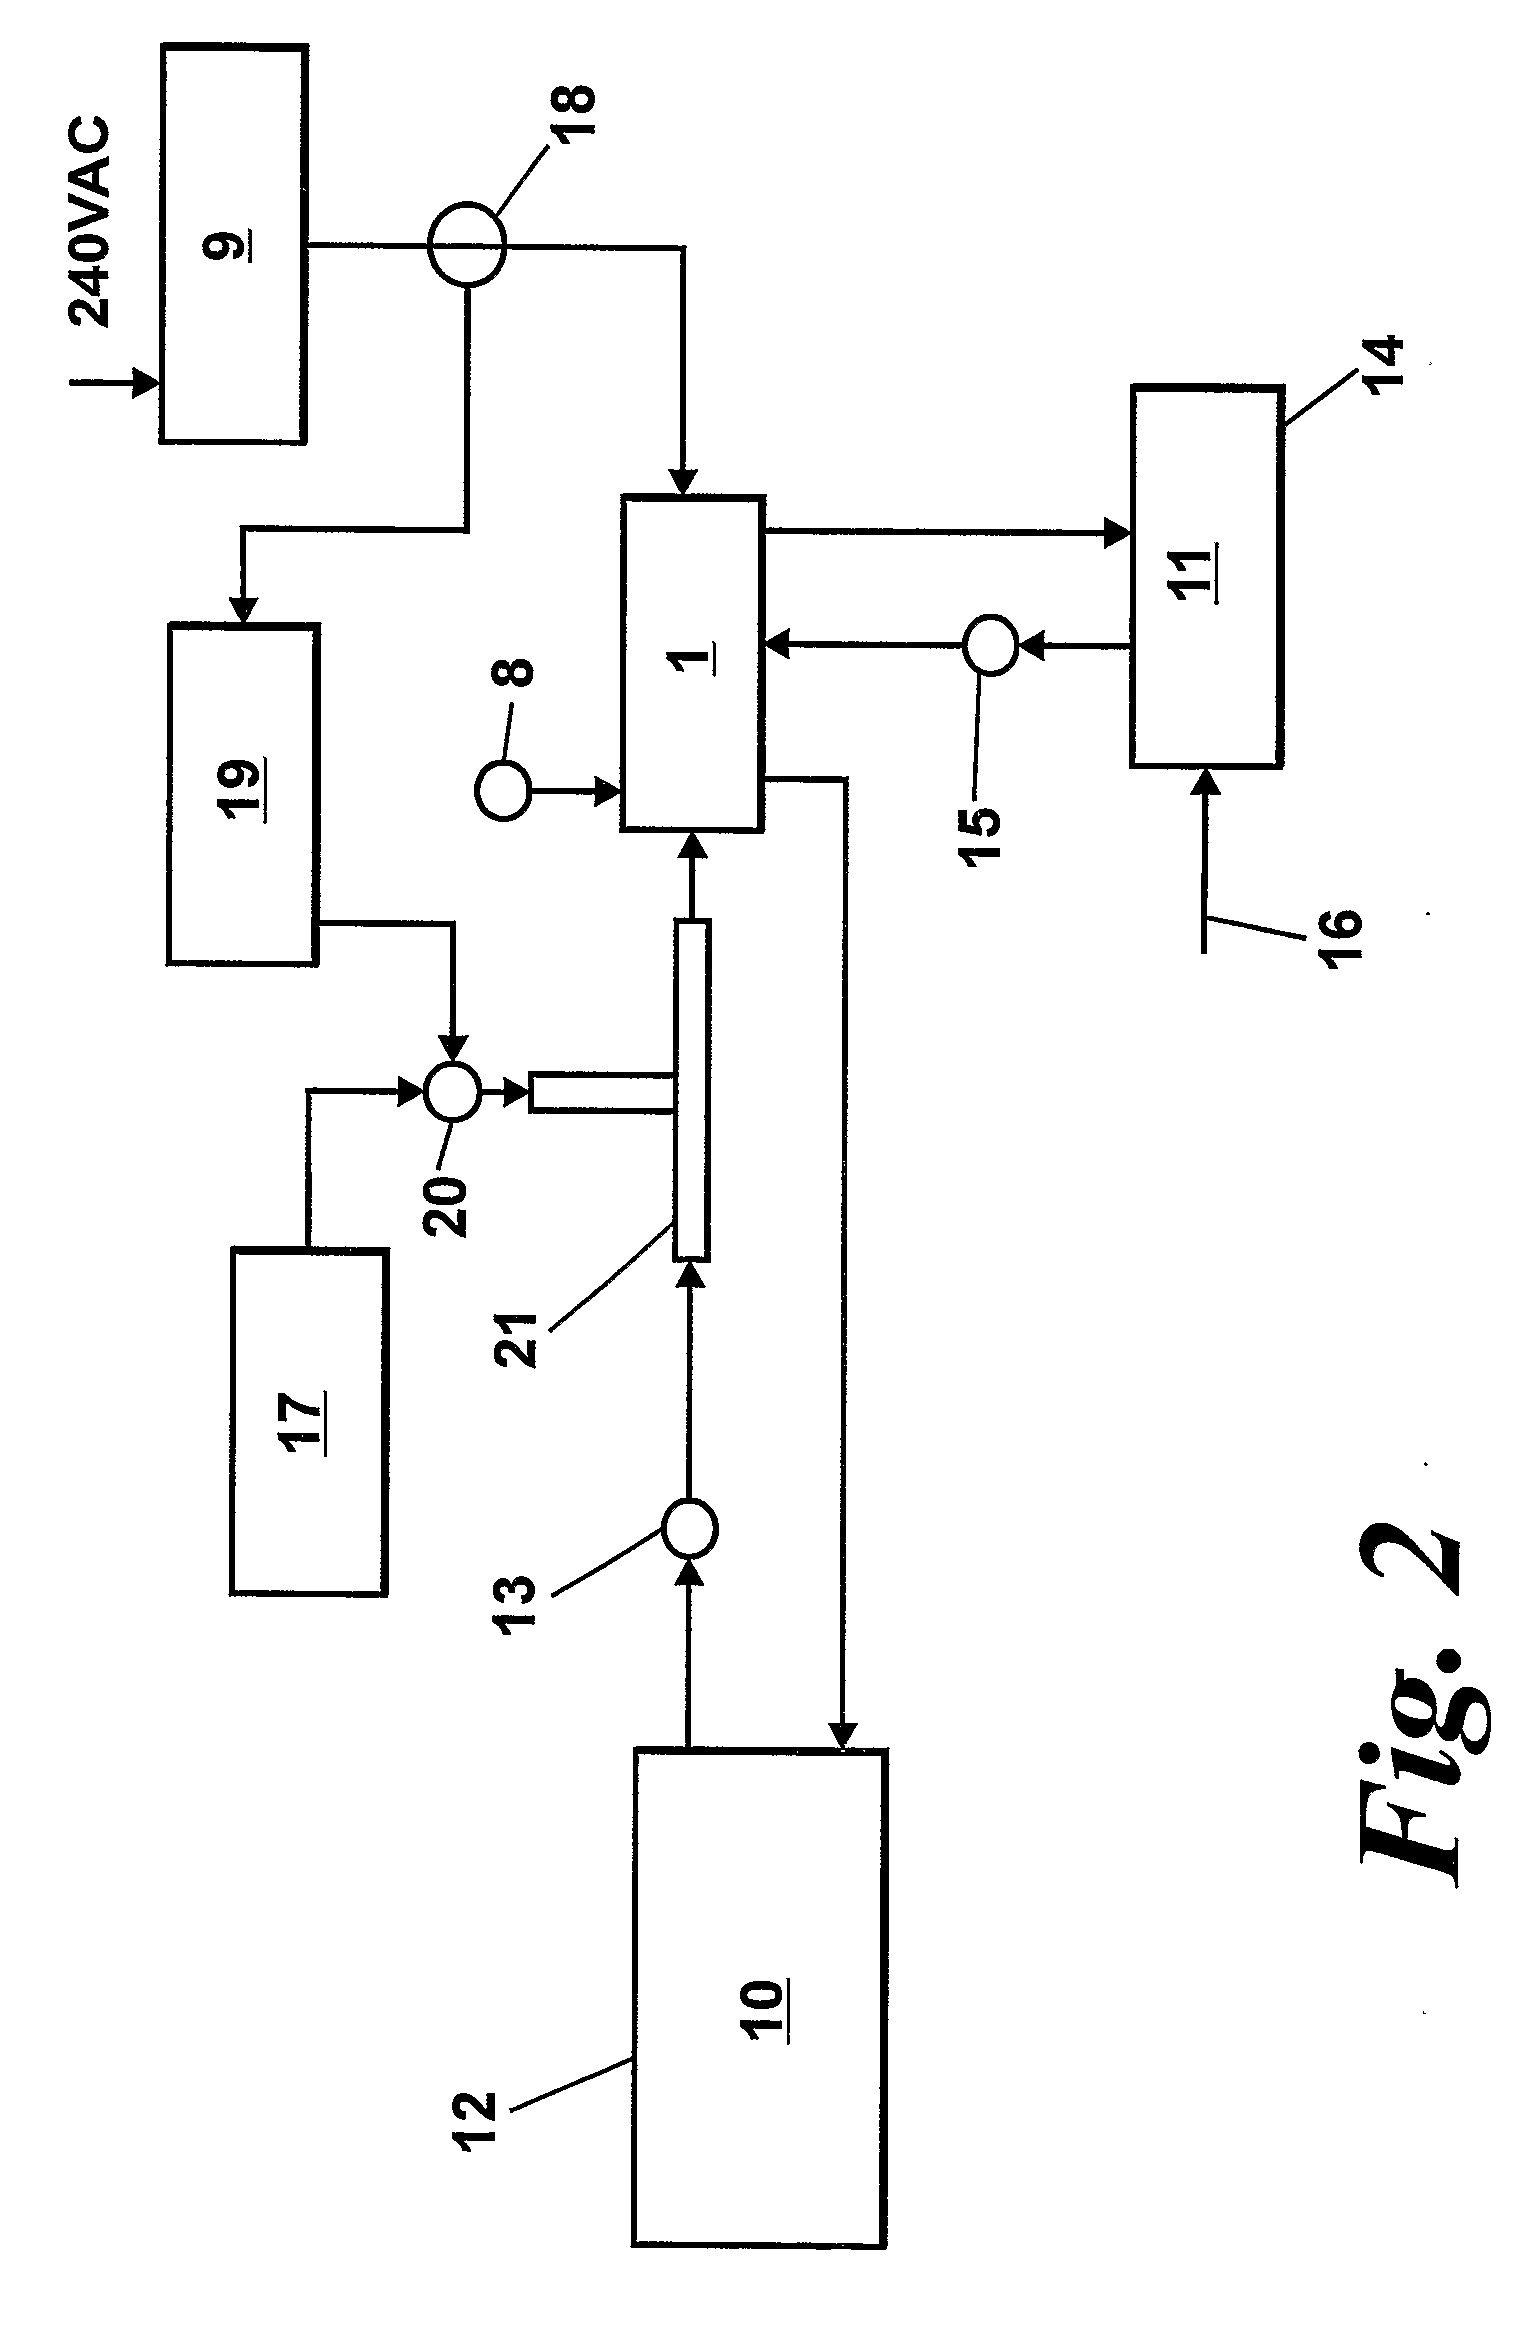 Method and apparatus for producing hydrogen peroxide